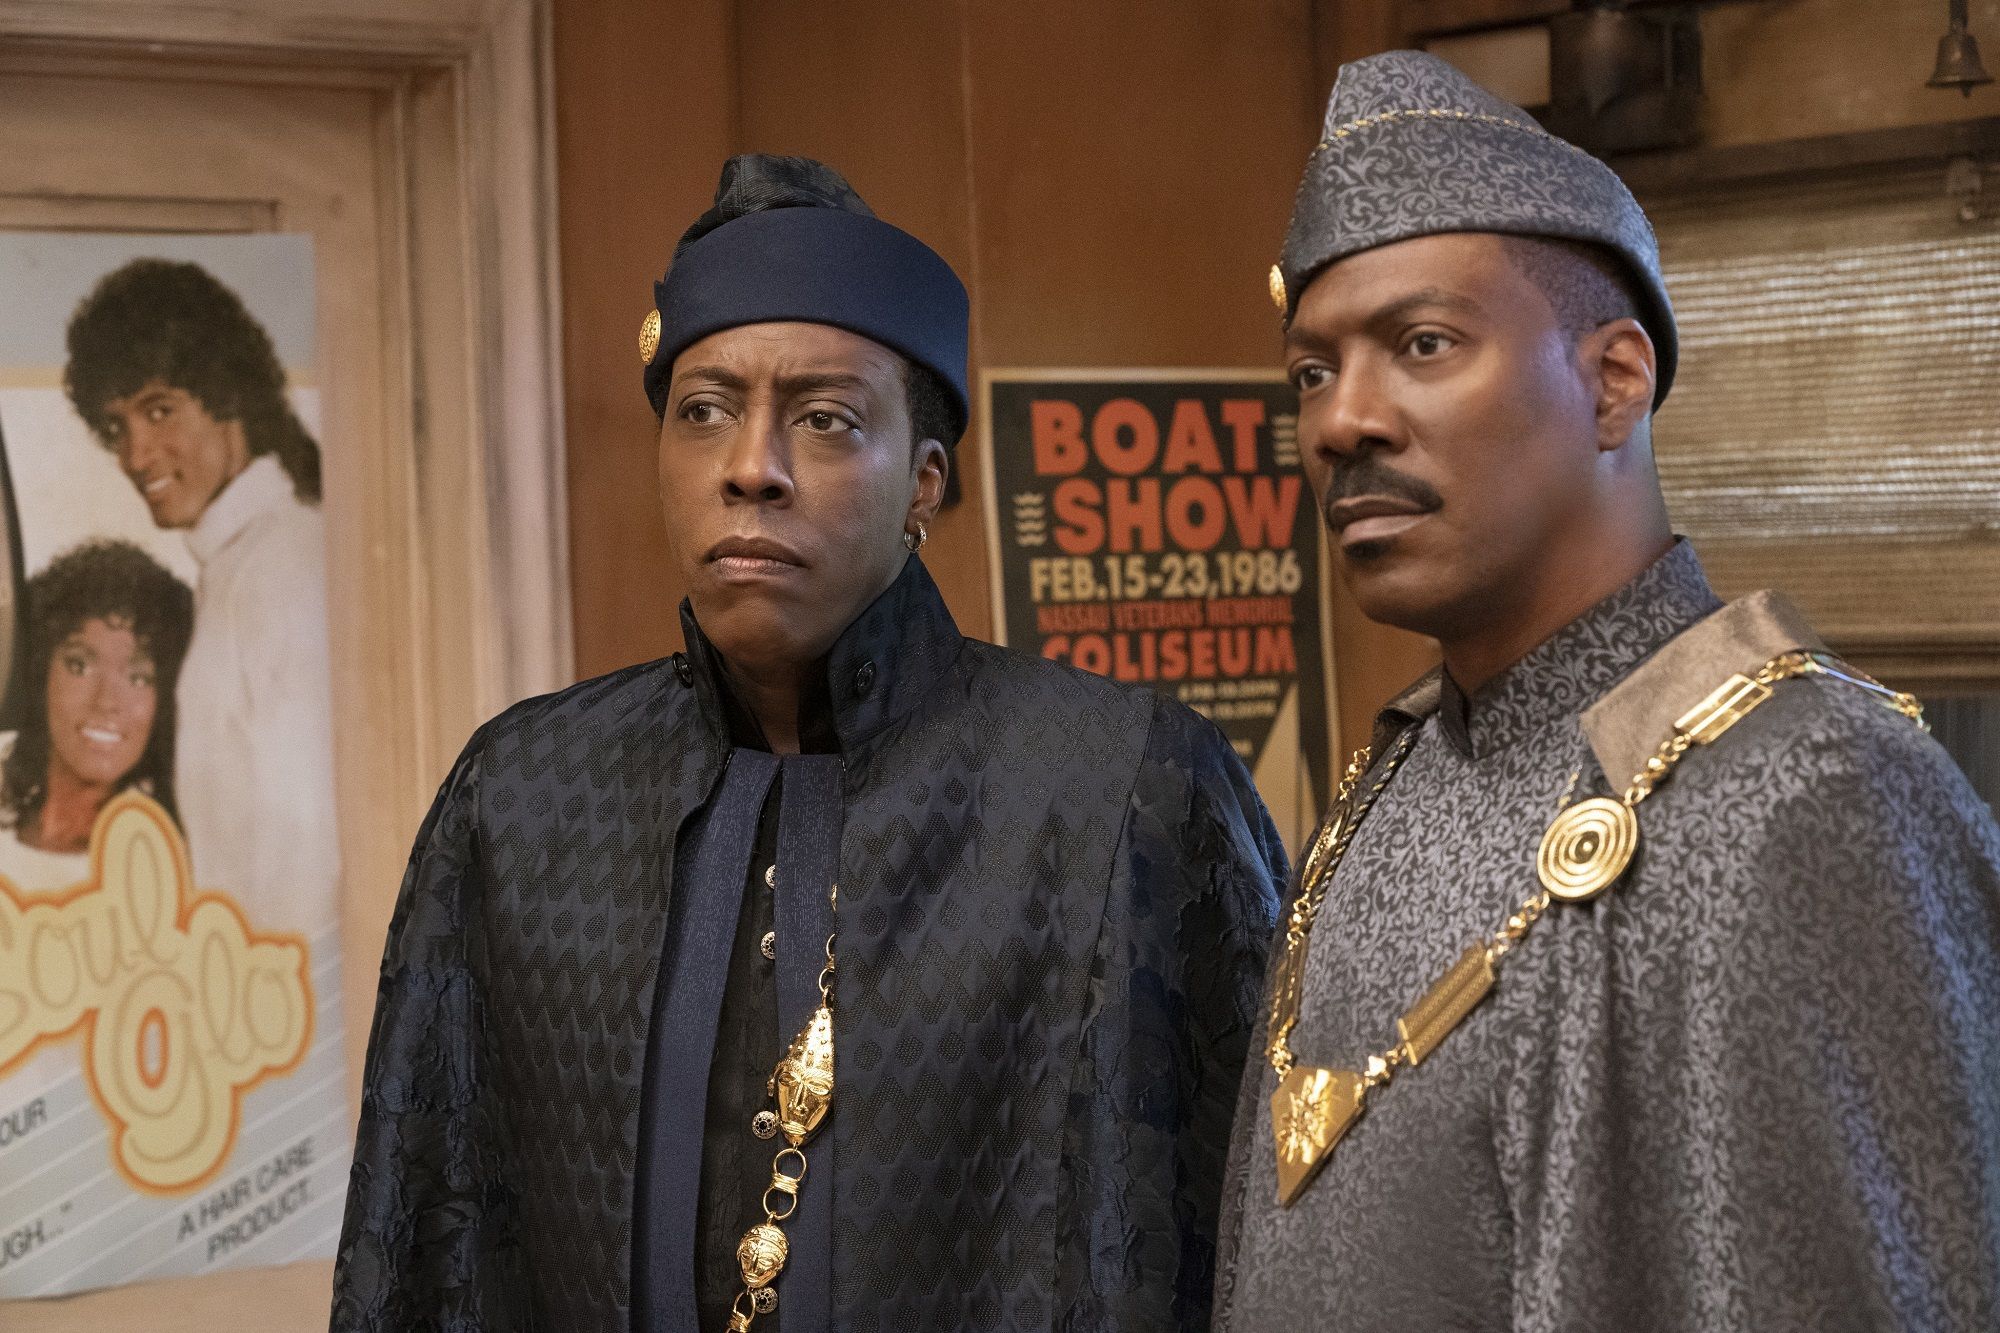 WATCH: The first trailer for Coming 2 America has finally arrived